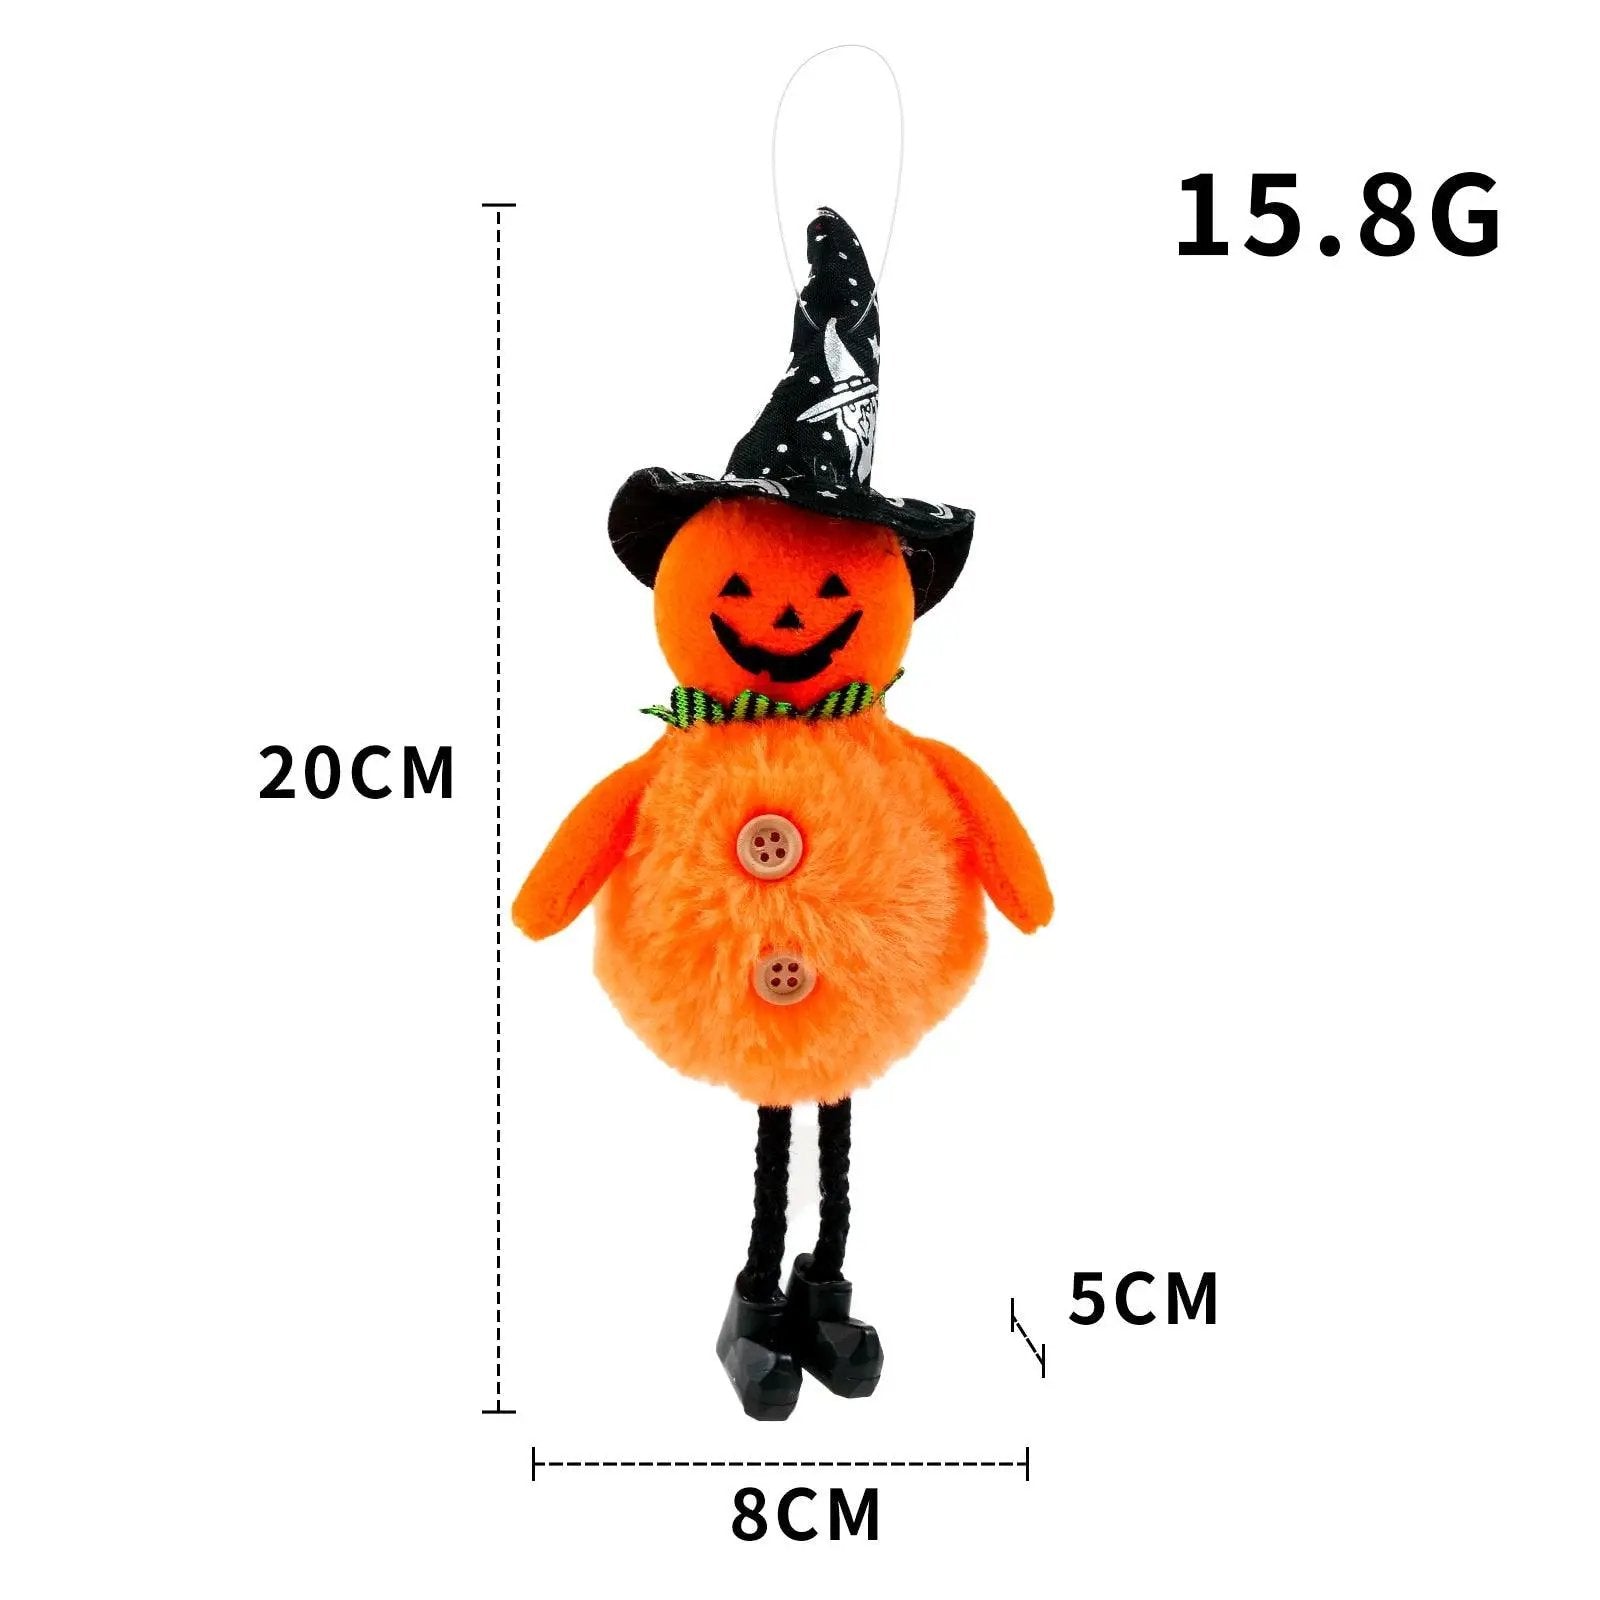 a small orange stuffed animal wearing a witches hat